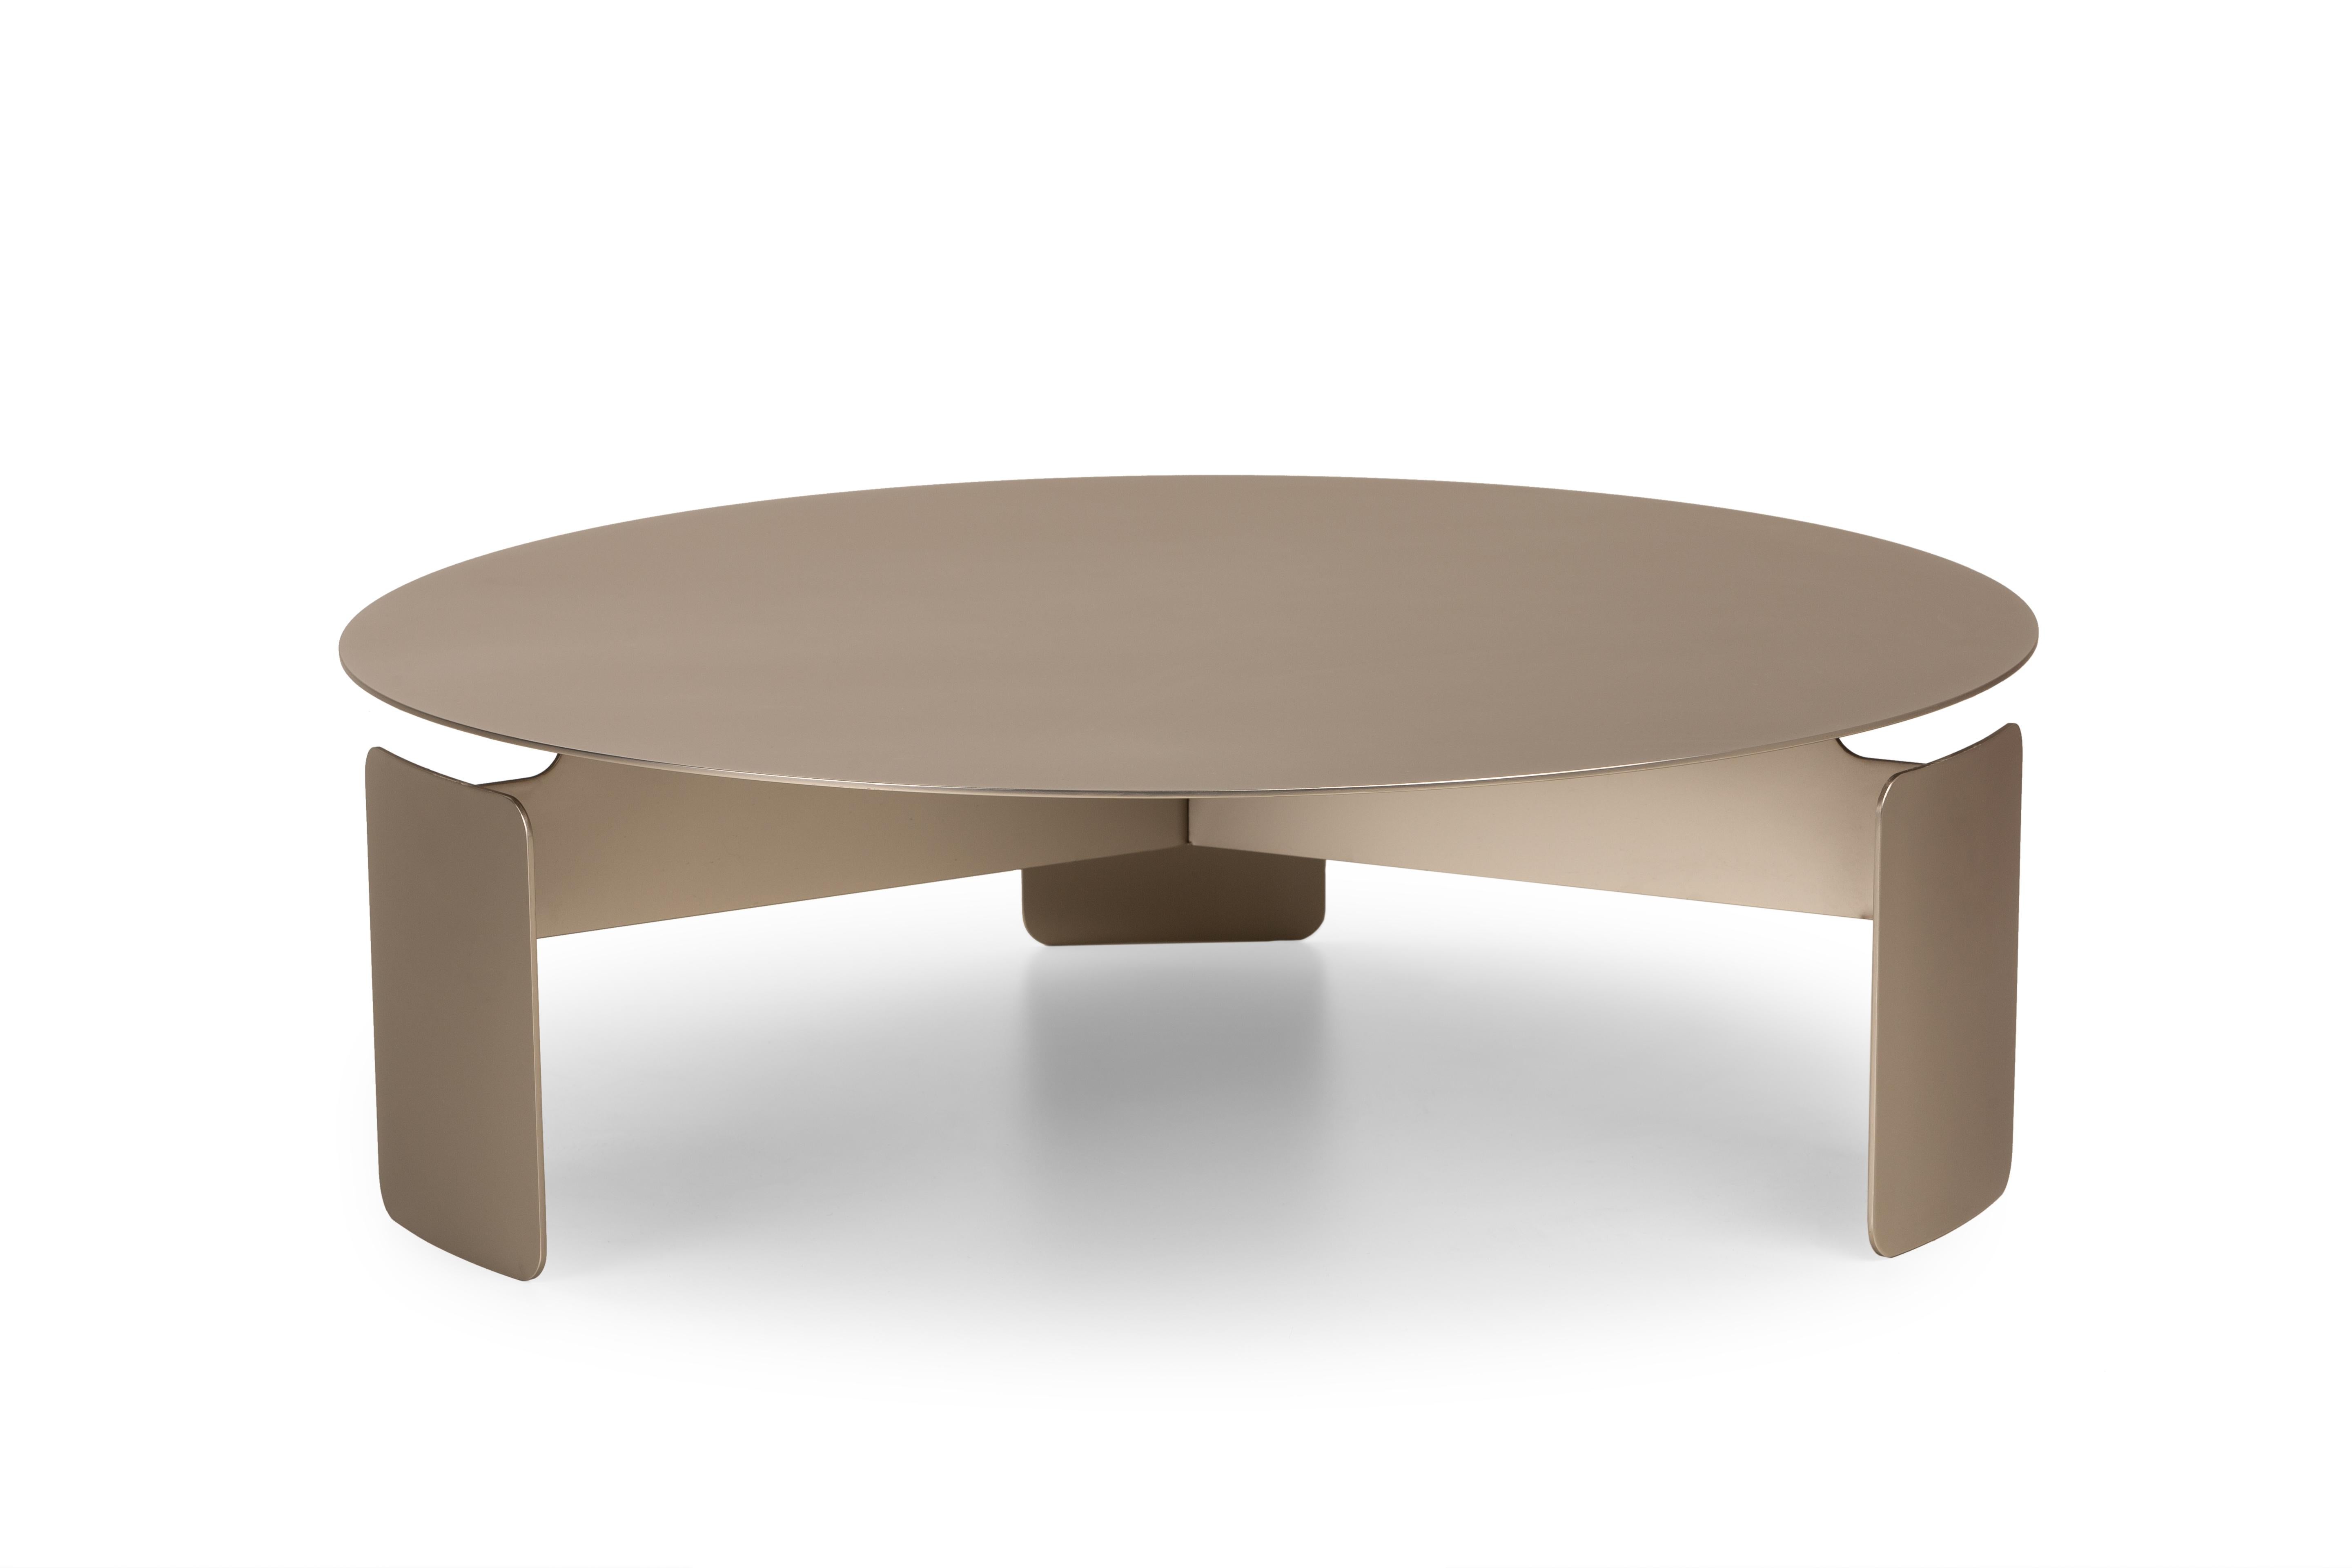 Shirudo matt nickel plated coffee table by Mingardo.
Dimensions: D90 x H28 cm.
Materials: matt nickel plated stainless steel.
Weight: 45 kg

Also available in different finishes. 

The name Shirudo comes from the Japanese word for shield – a